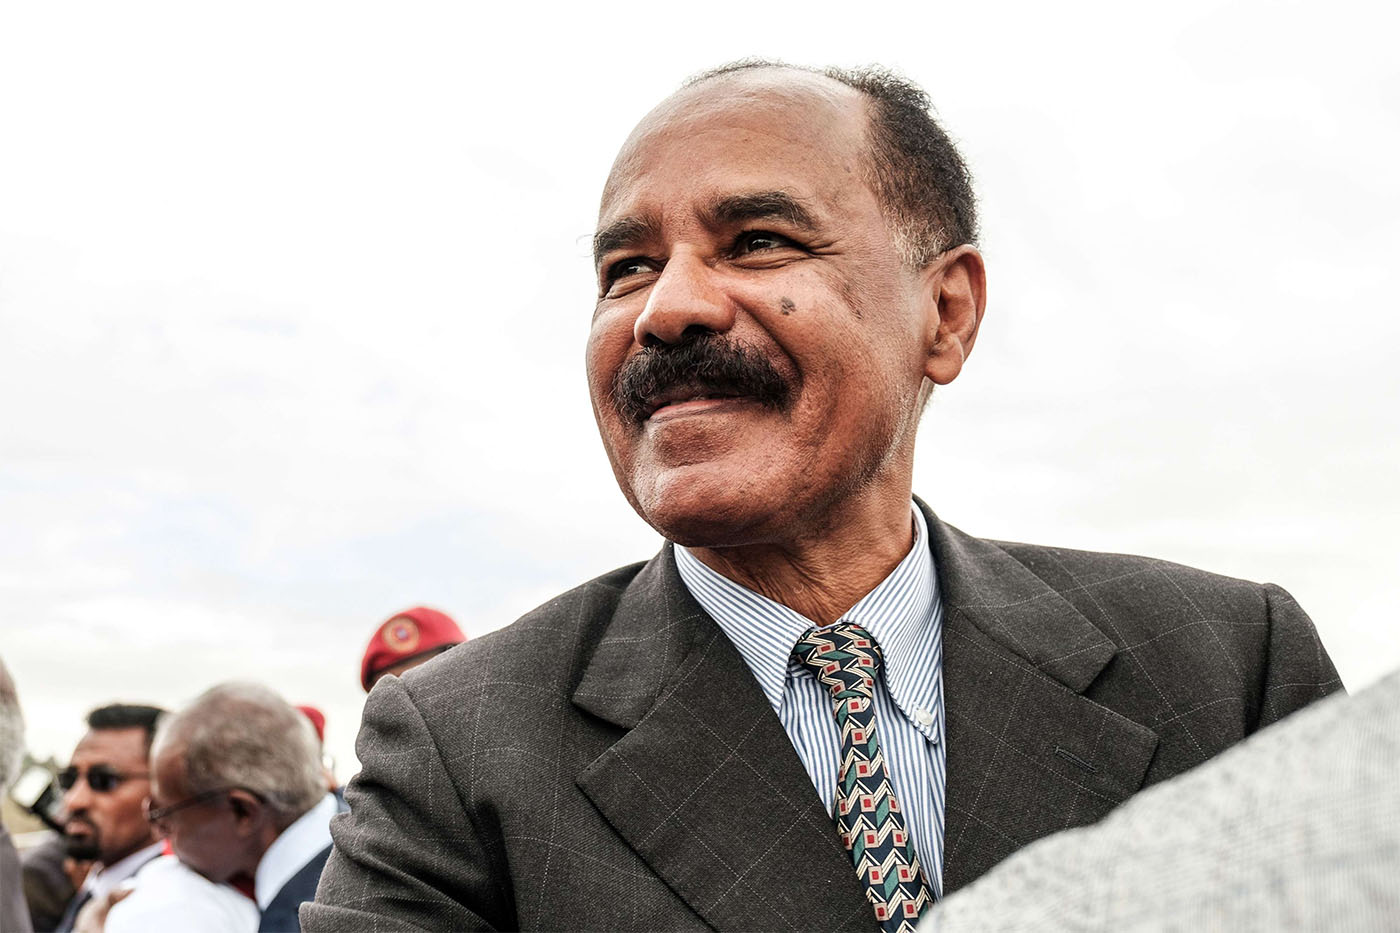 Eritrea's President Isaias Afwerki smiles upon his arrival at the airport in Gondar